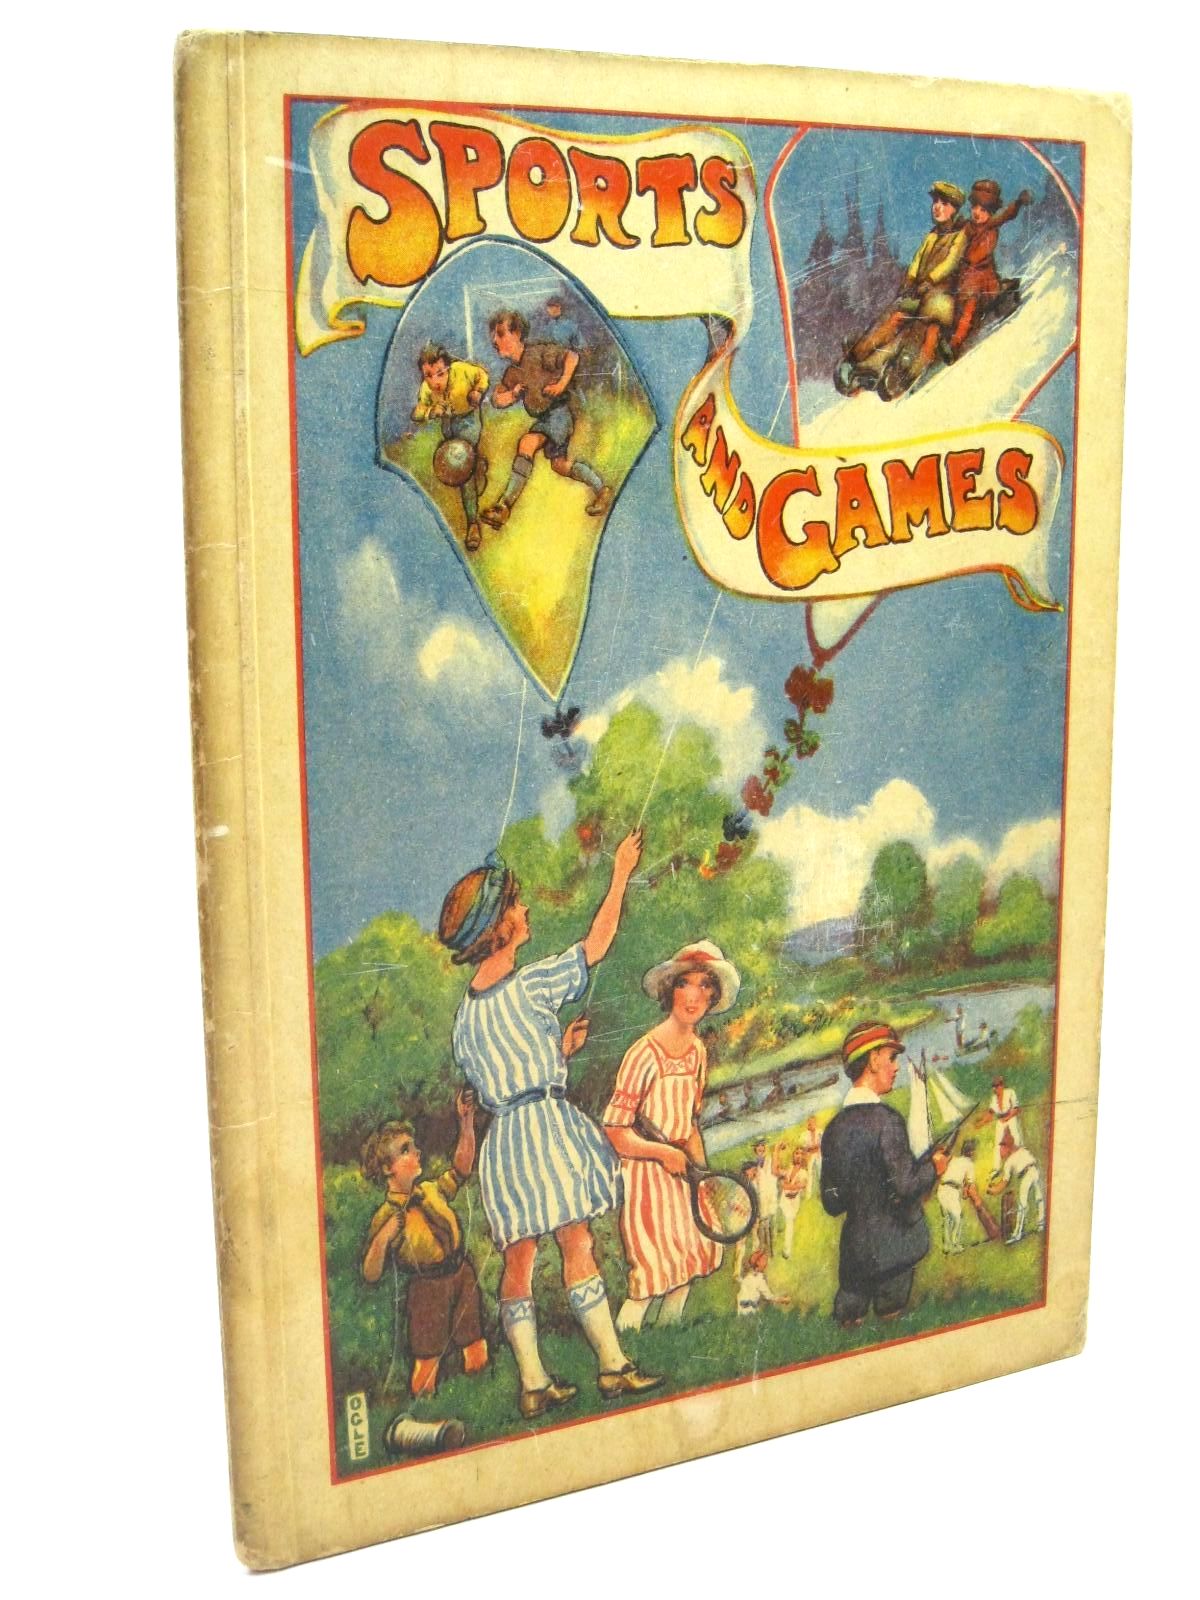 Cover of SPORTS AND GAMES by Enid Blyton